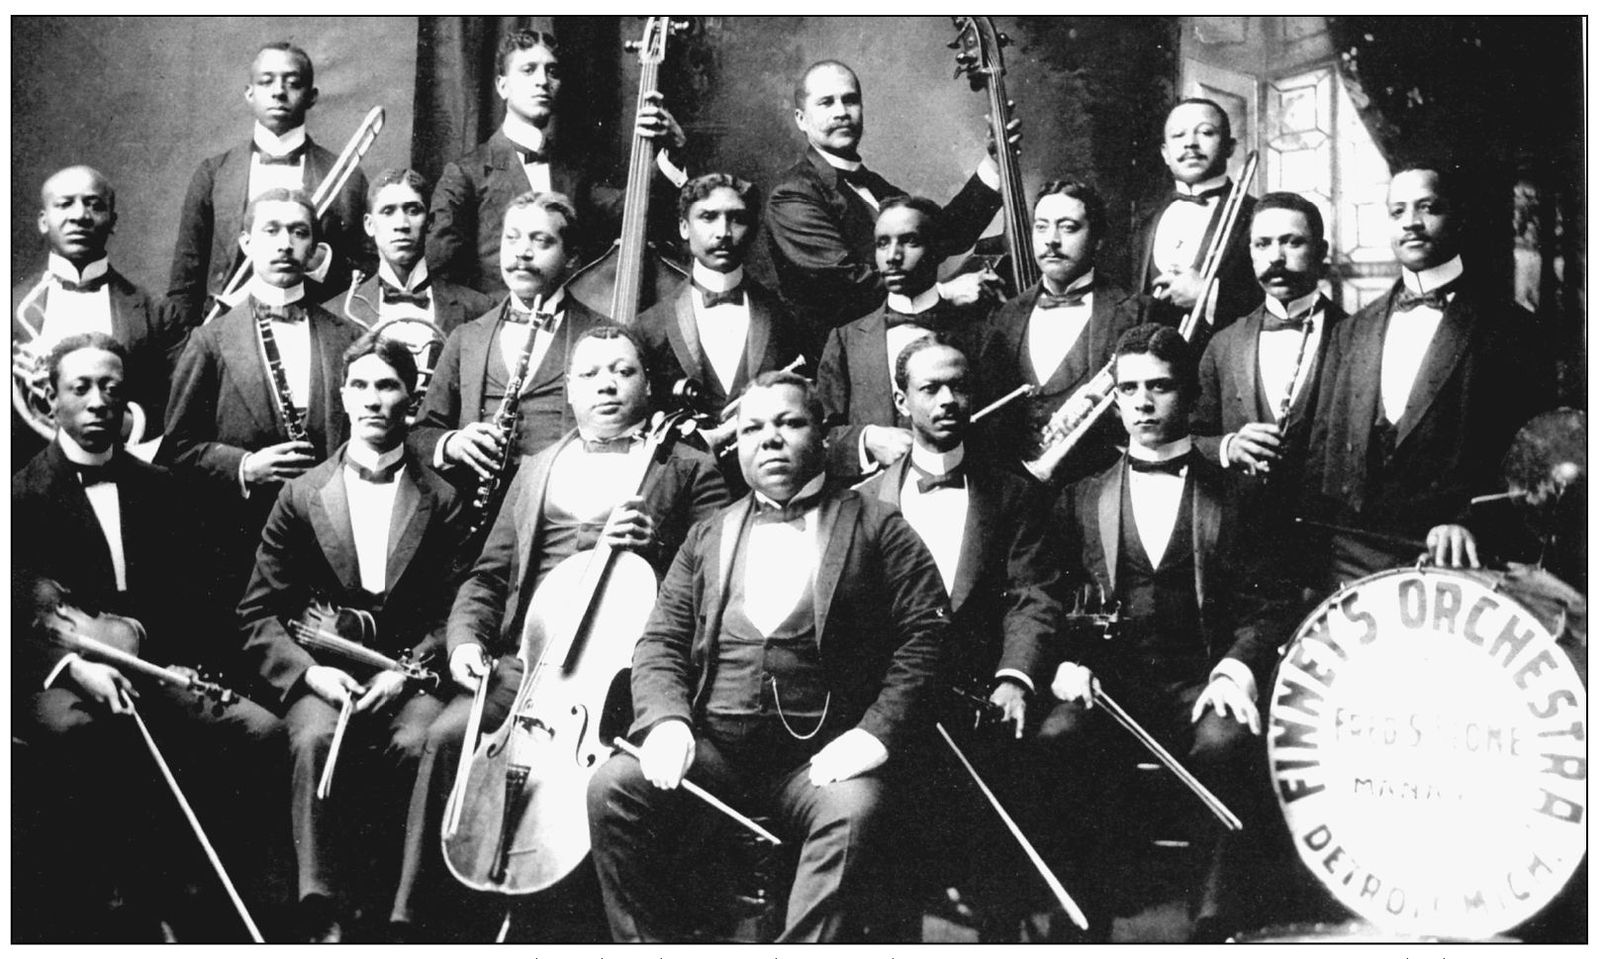 FINNEYS ORCHESTRA After the death of John Bailey in 1871 Finney reorganized - photo 4